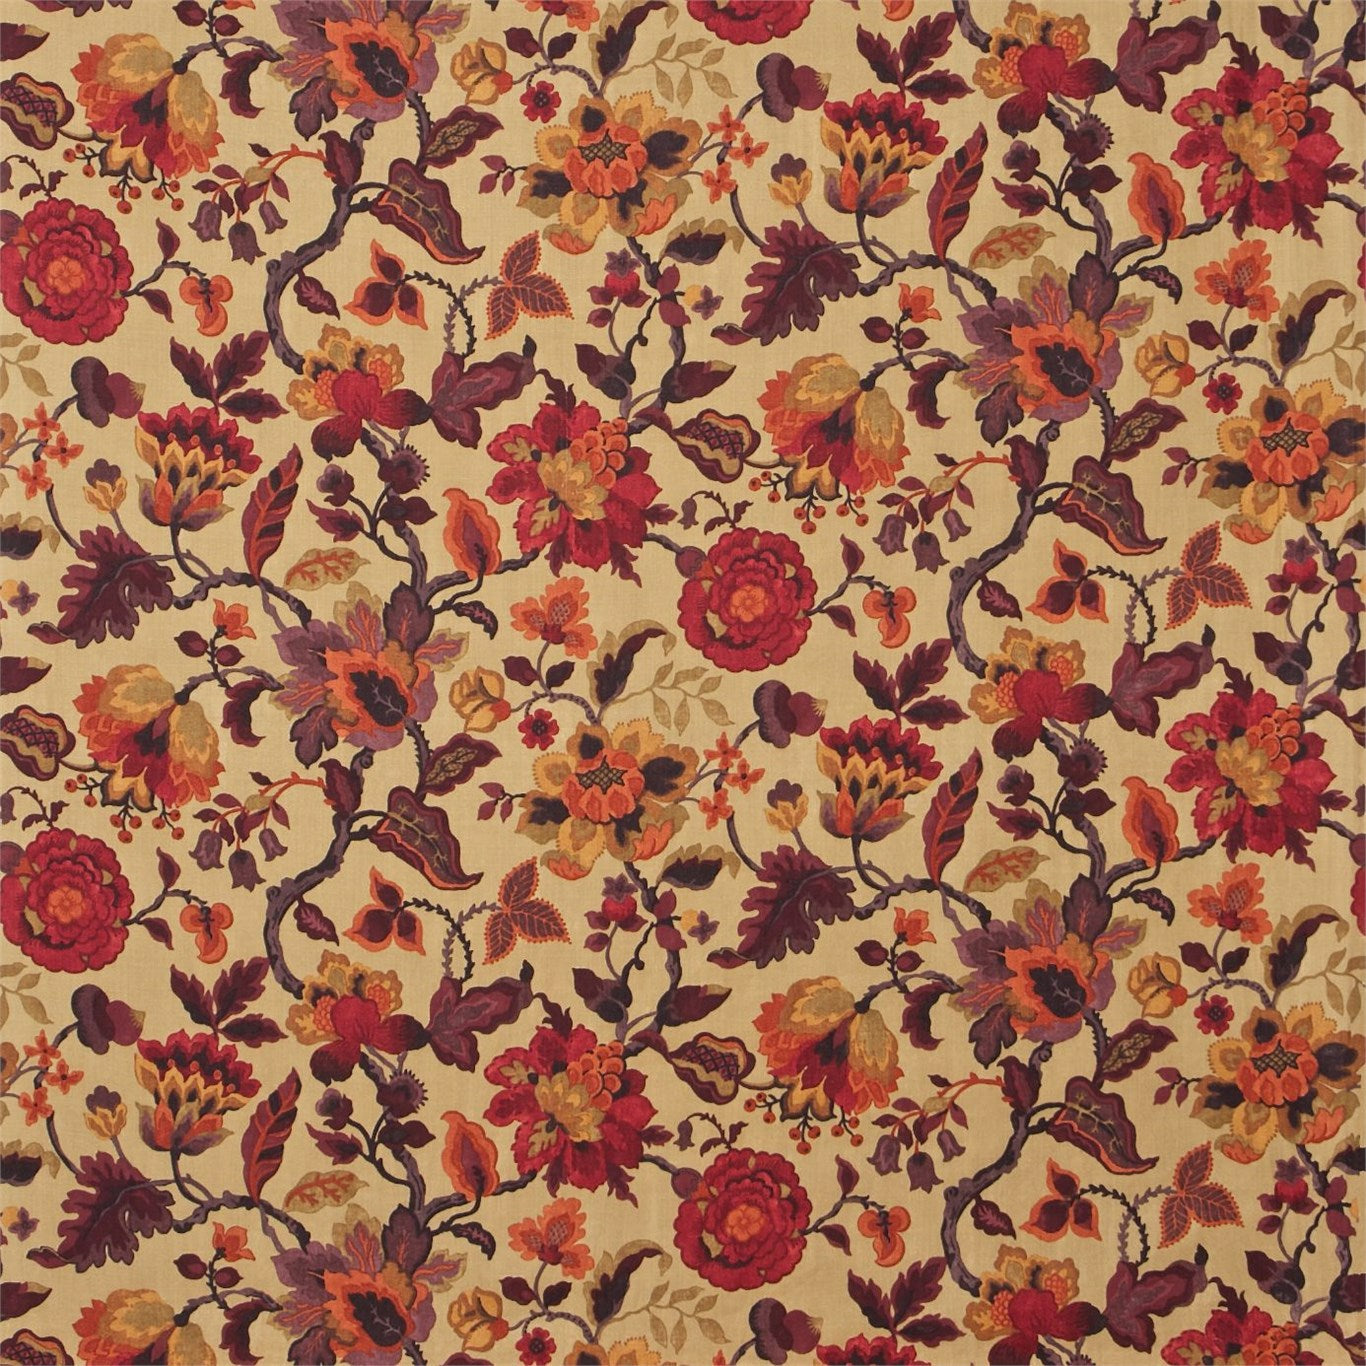 Amanpuri Fabric by Sanderson - DAUP224431 - Old Gold/Aubergine